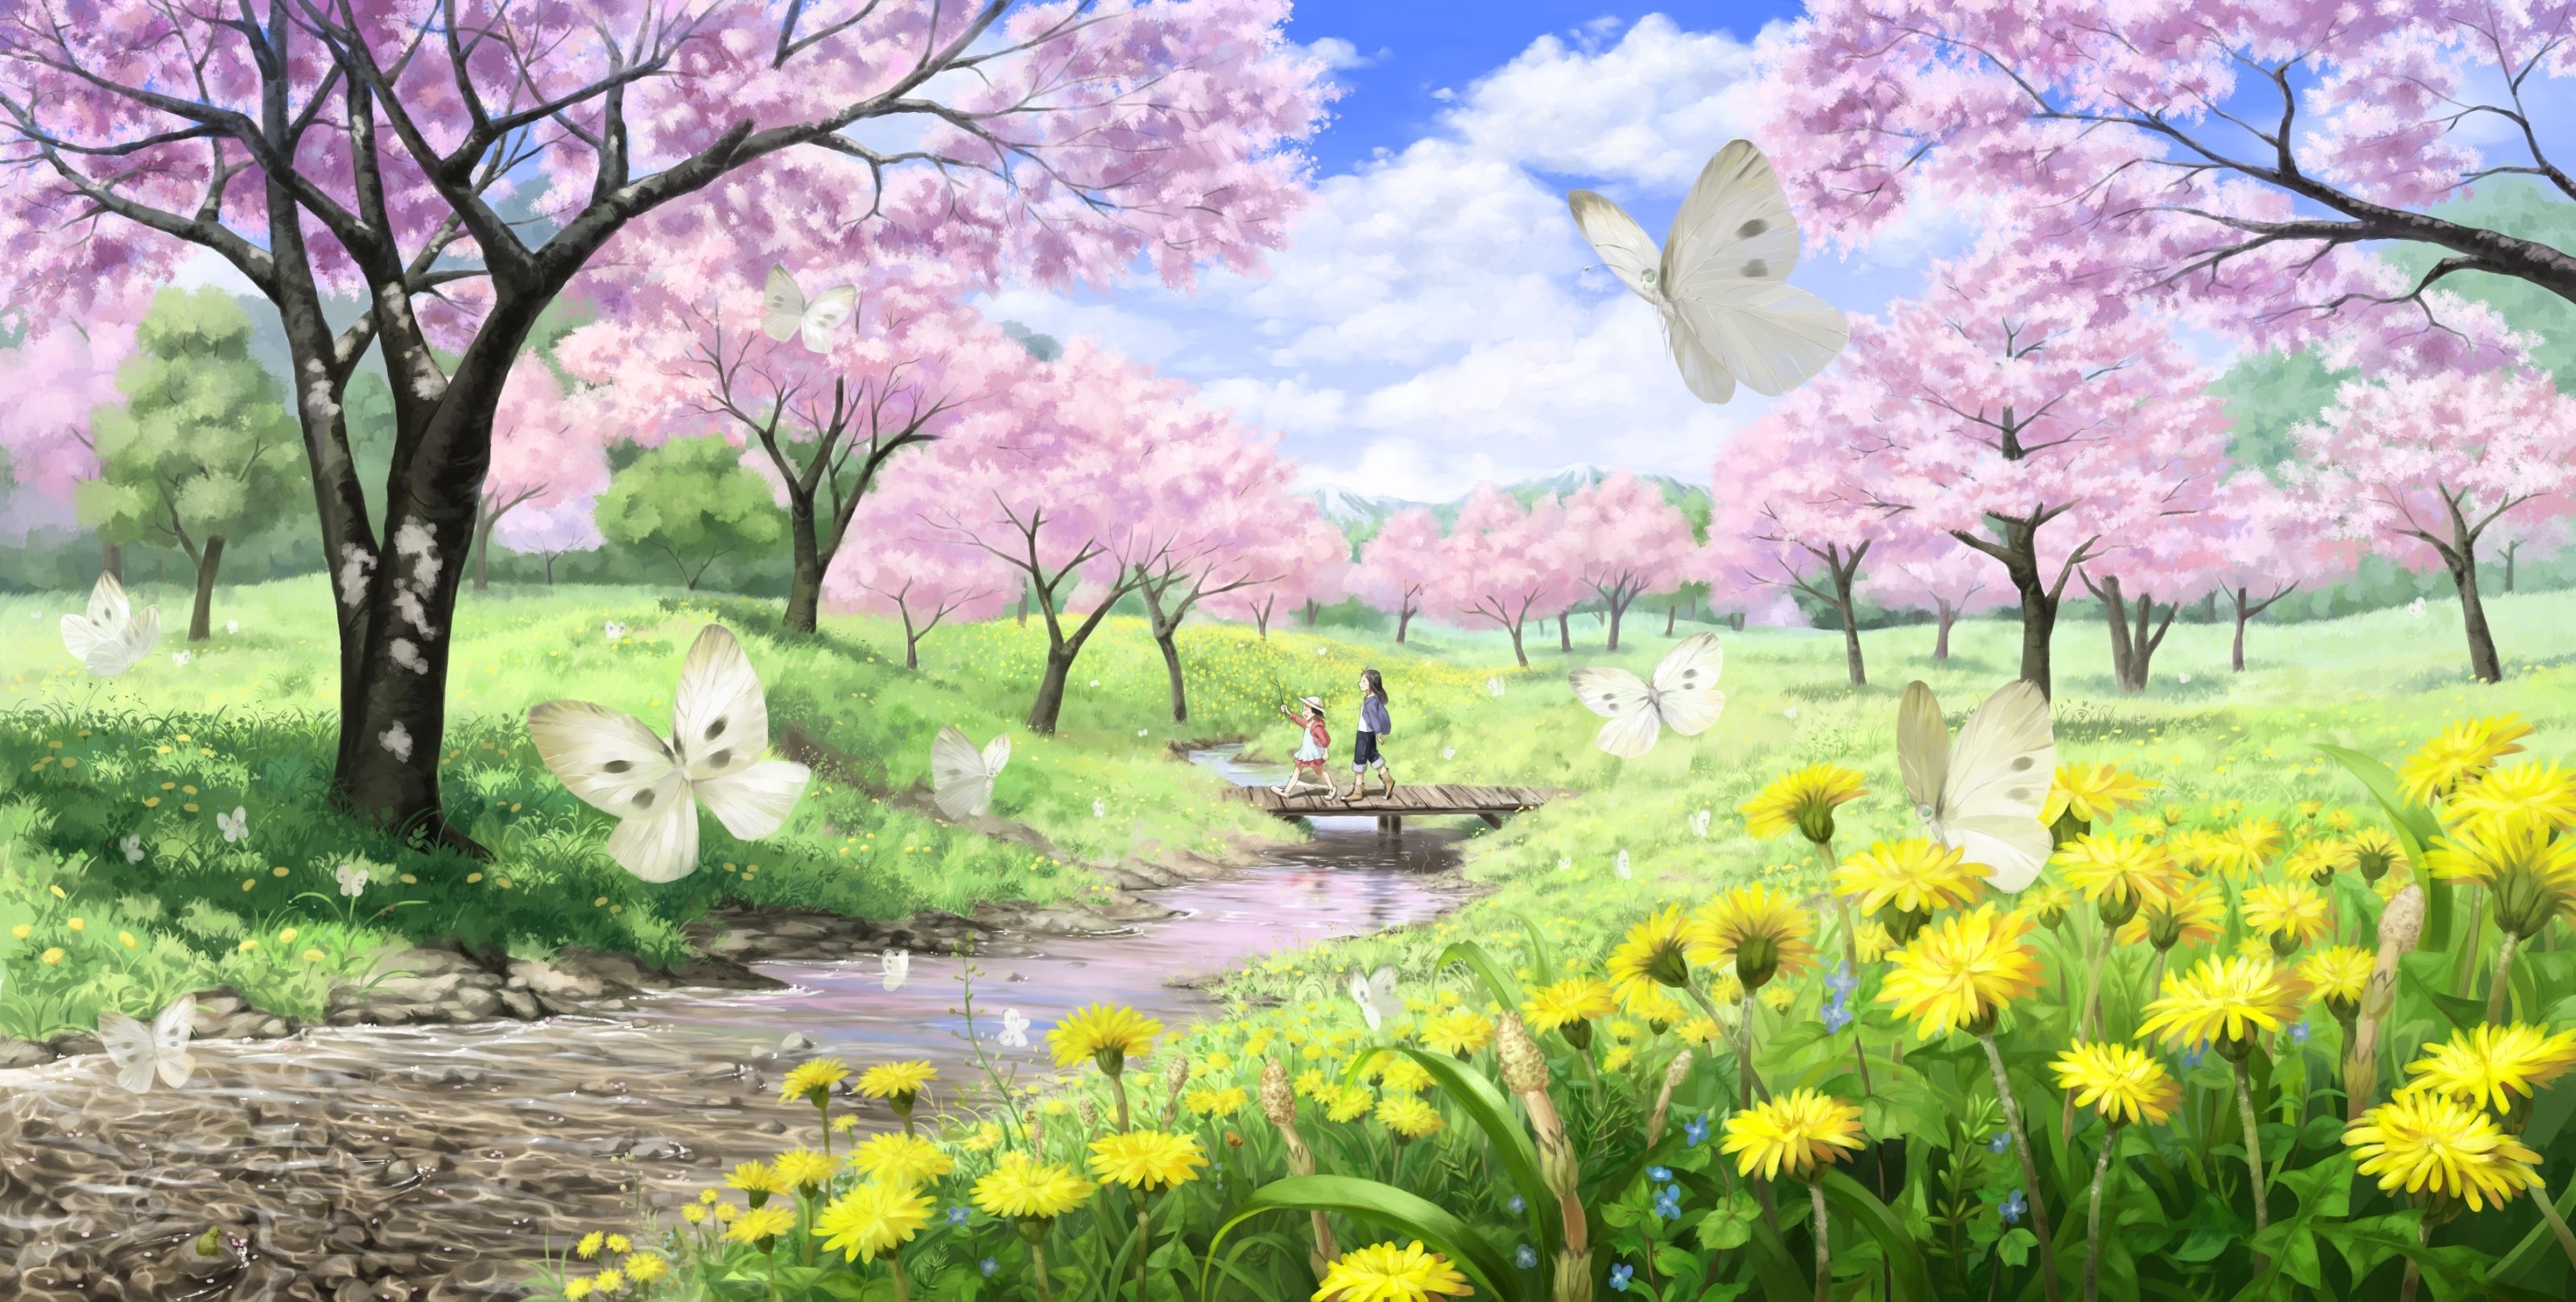 My collection of anime sceneries. Spring scenery, Anime scenery, Scenery wallpaper